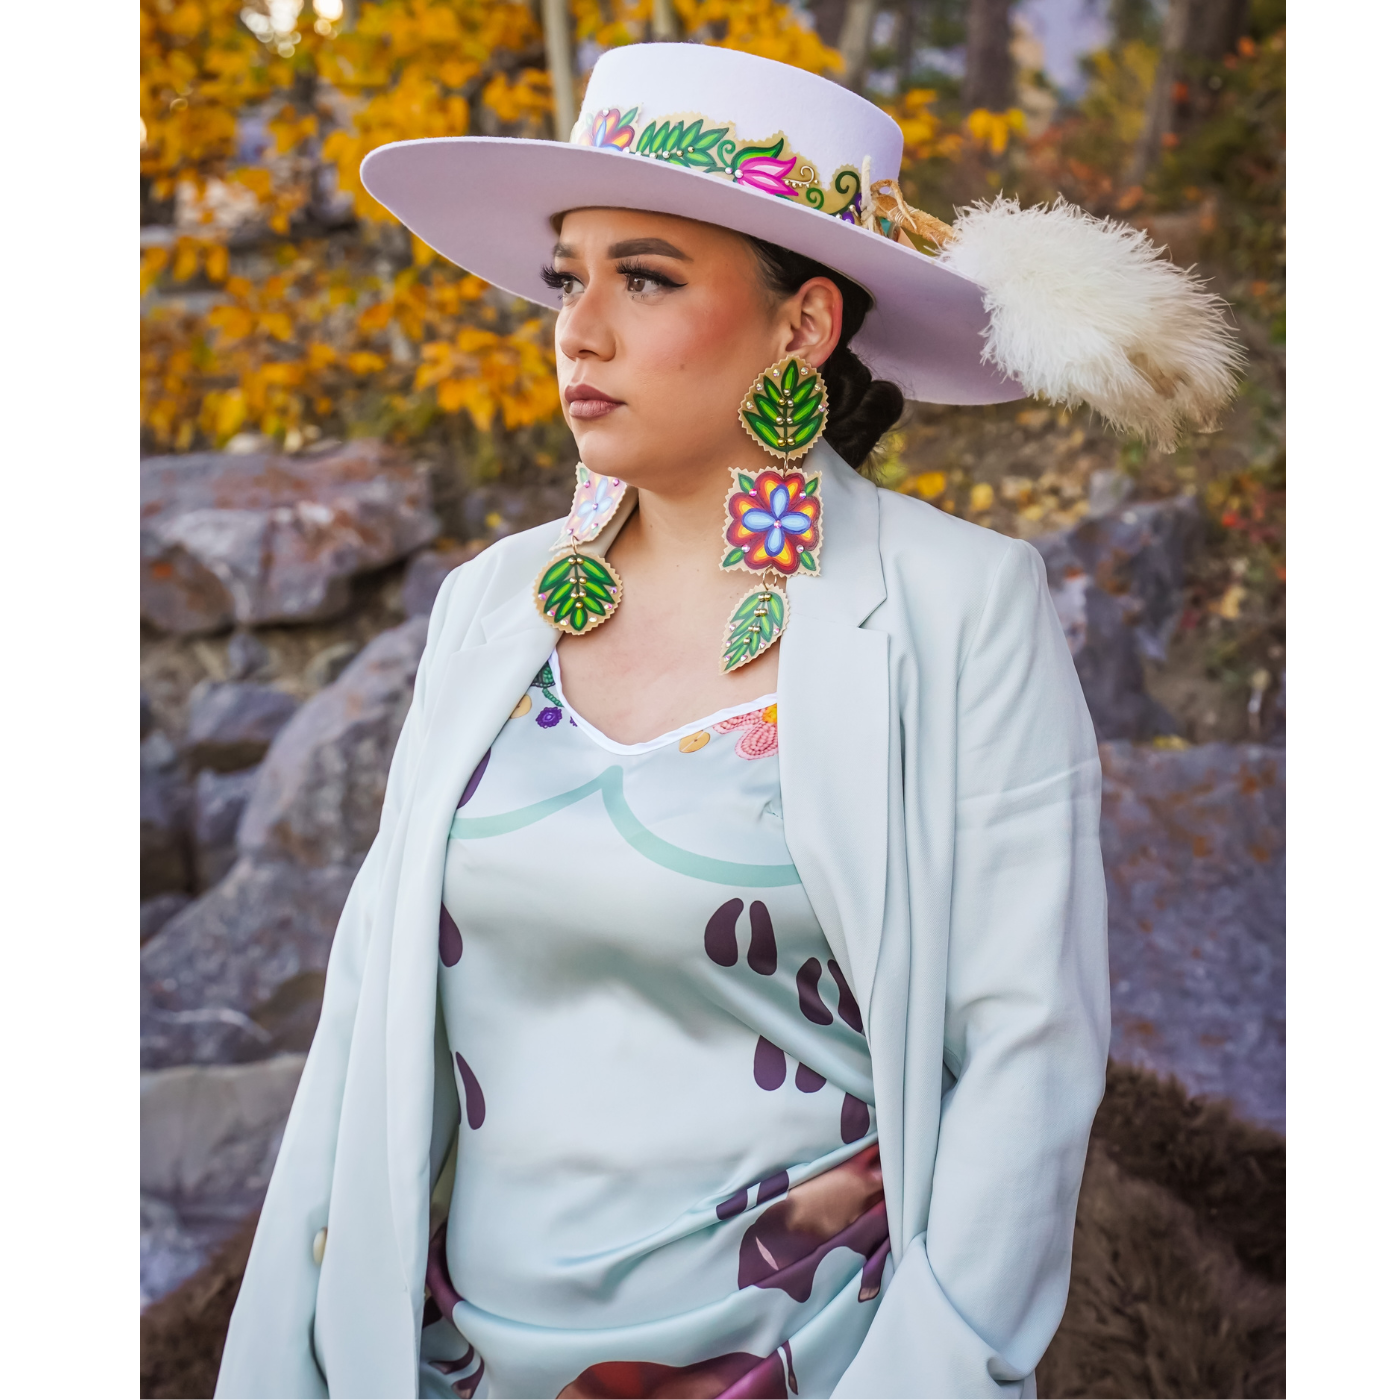 Photograph of Osamuskwasis Roan standing outside during autumn and wearing their handmade clothing: A white hat featuring a band of bright florals and a feather accessory. Osamuskwasis is also wearing oversized earrings from their online shop with the same floral patterns of the har. Finally, a silk dress in soft blue with smaller elements of pink and purple throughout.